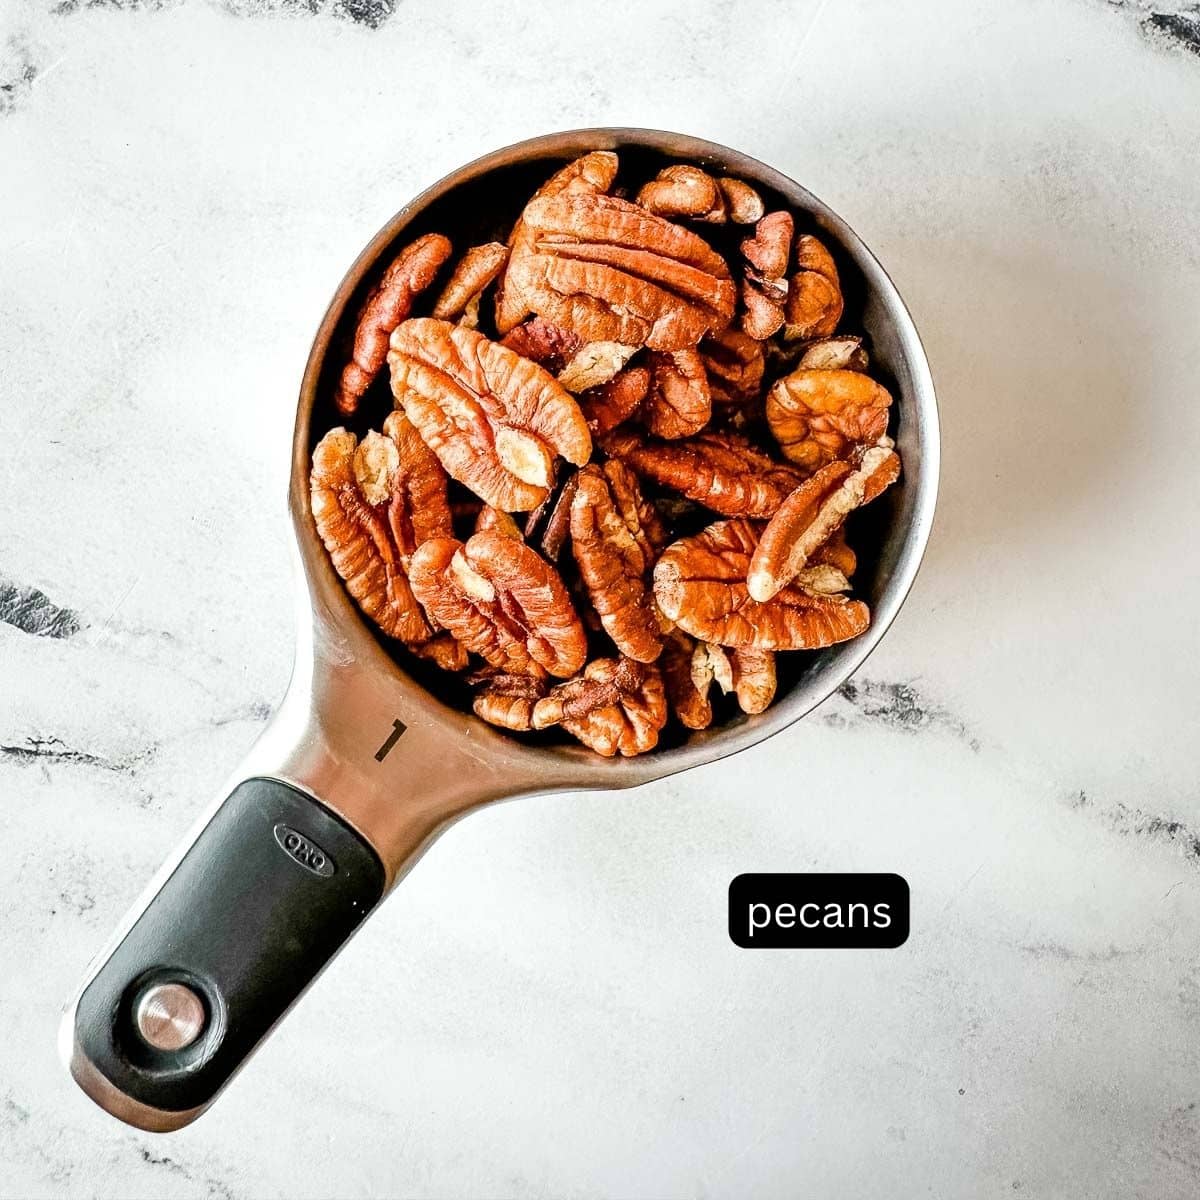 Labeled pecan halves in a measuring cup.